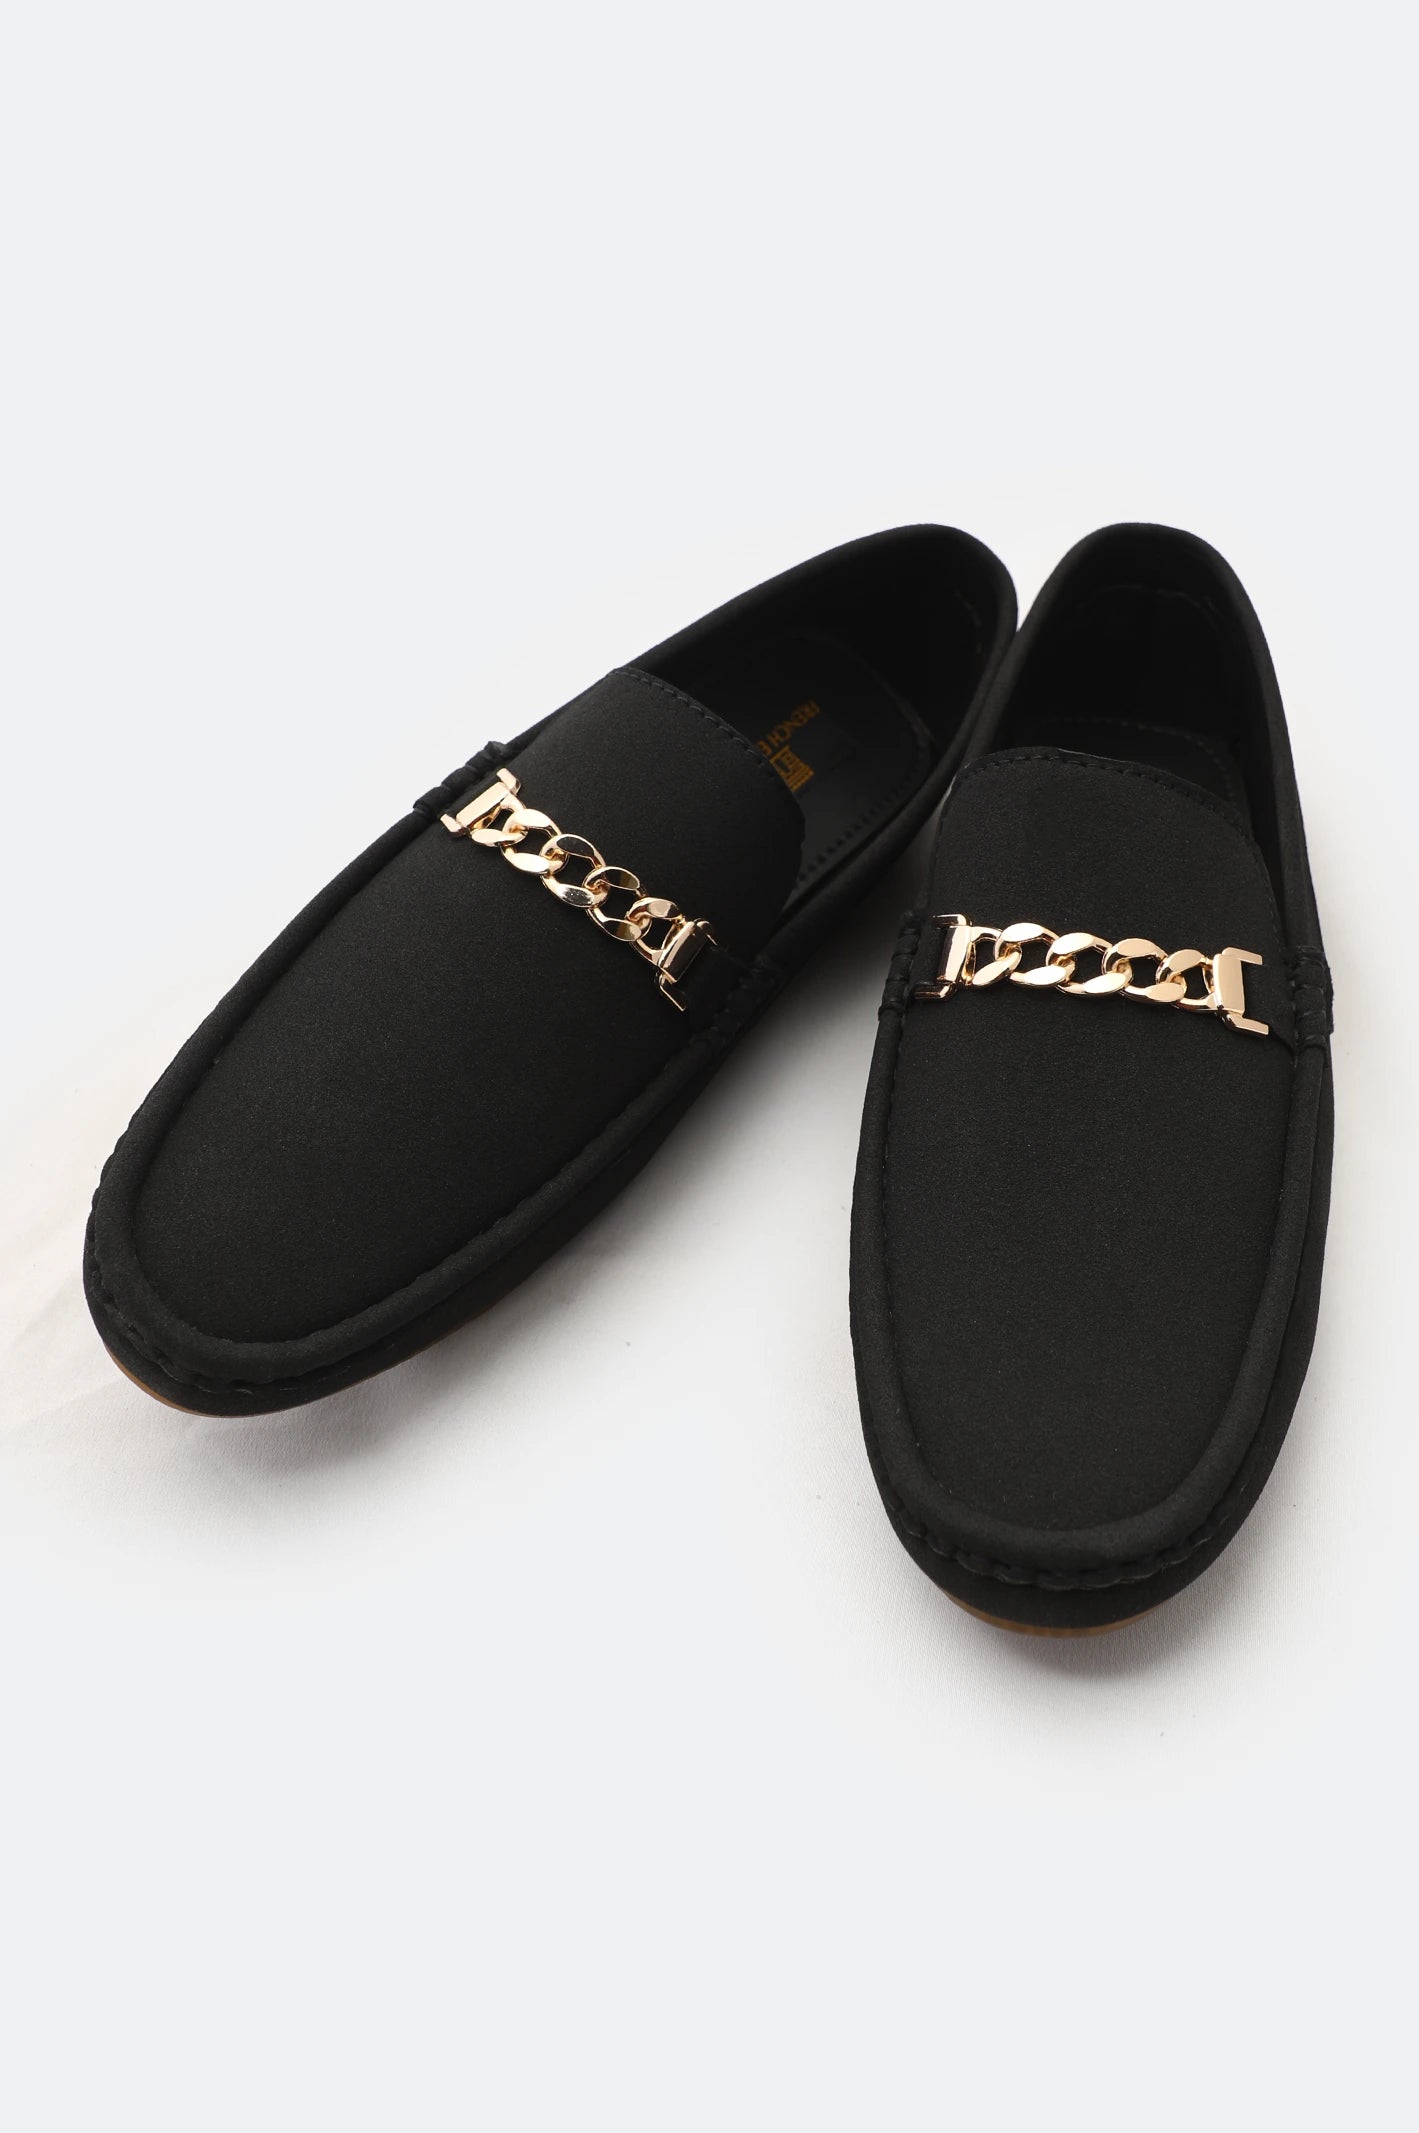 Black Casual Shoes For Men From Diners